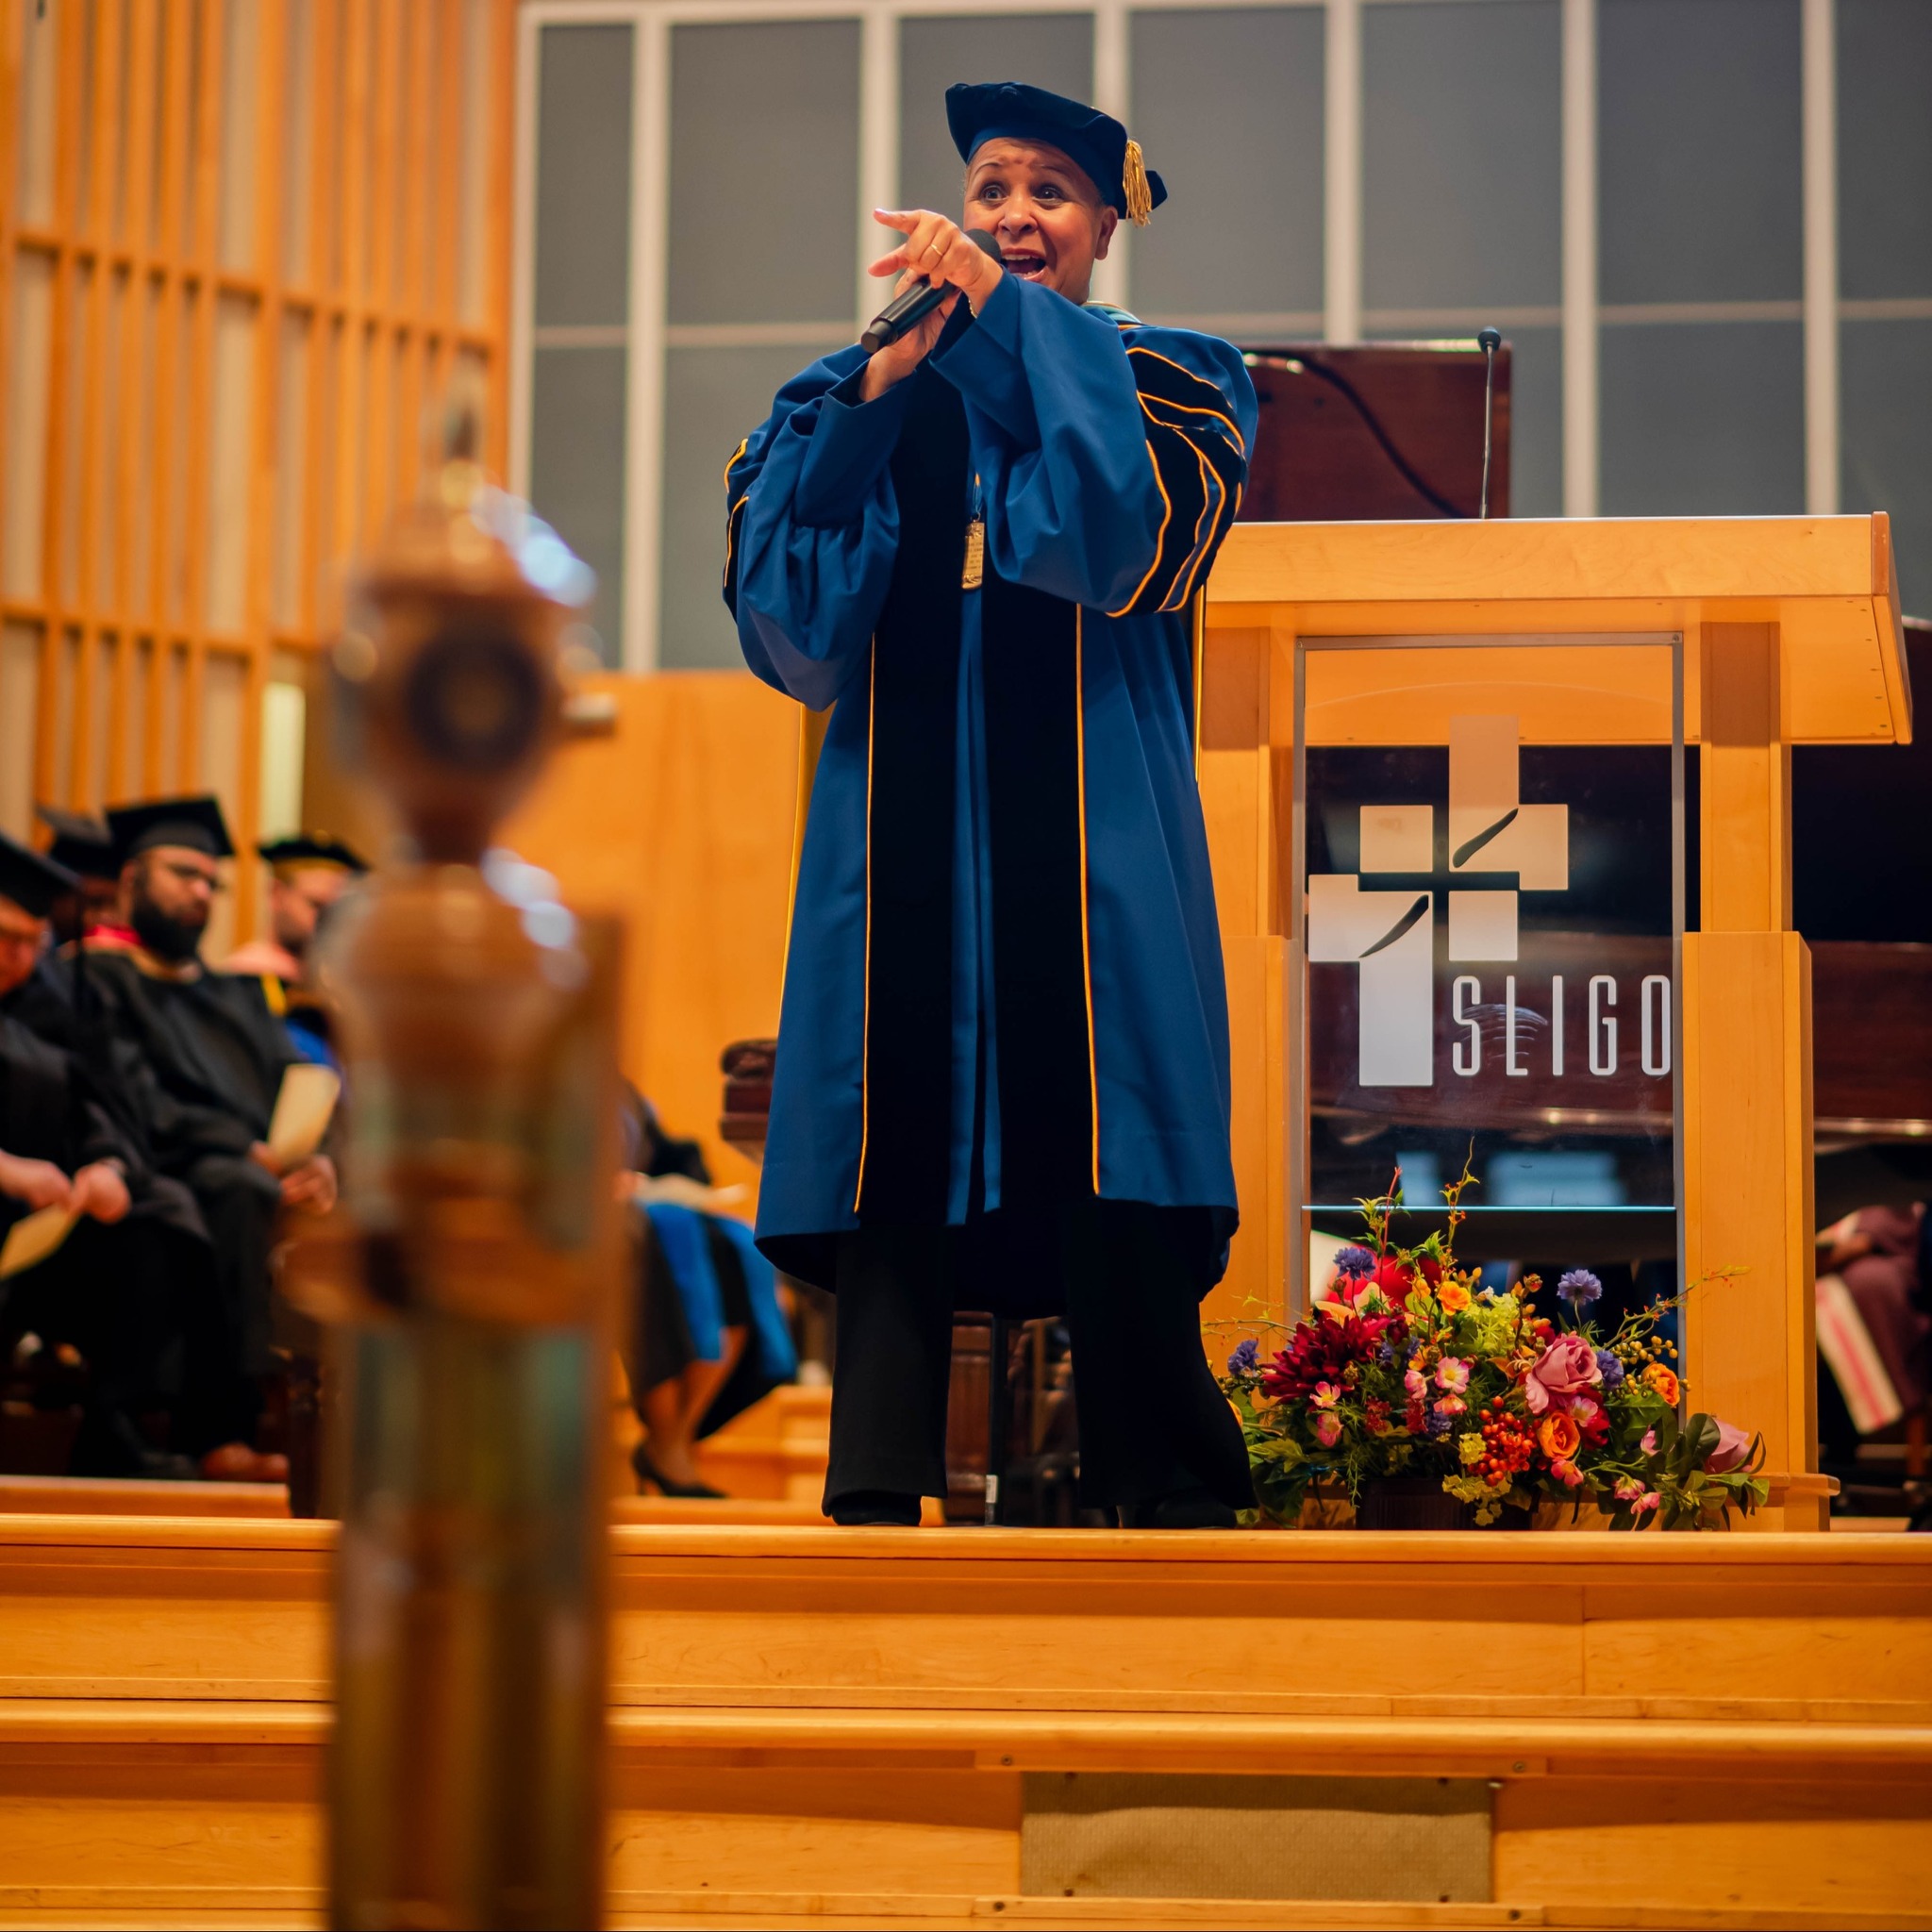 During the convocation, WAU’s provost, Cheryl Kisunzu, spoke about the significance of this year-long celebration